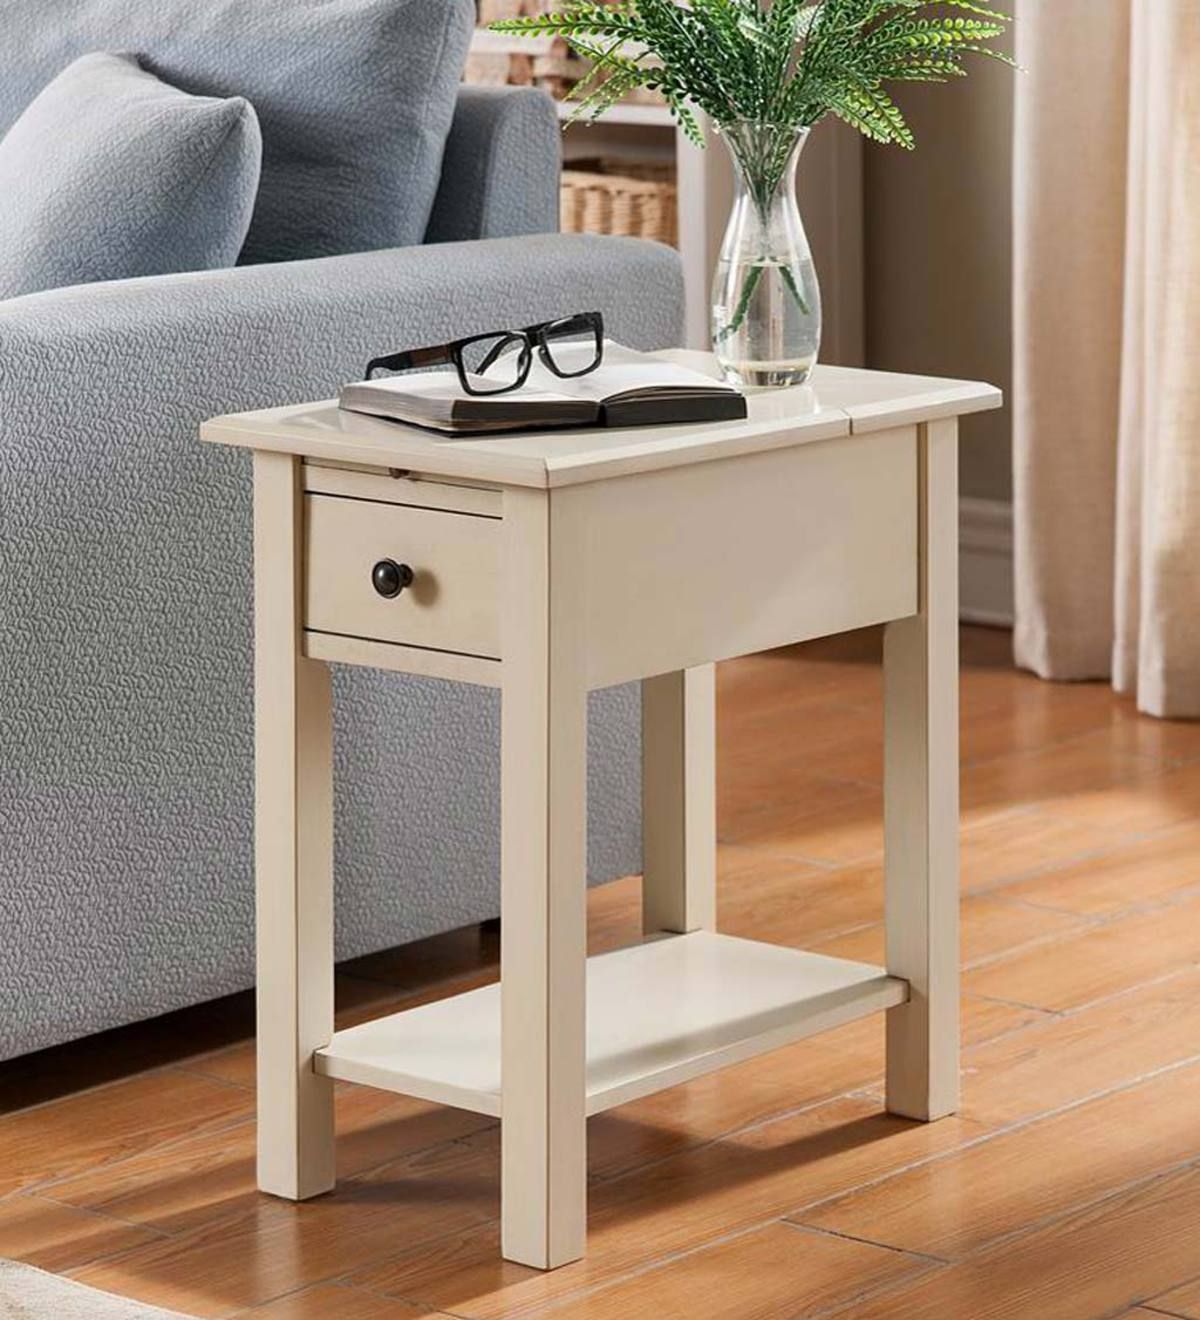 Benton Side Table With Charging Station – Black | Plowhearth Throughout Coffee Tables With Charging Station (View 3 of 20)